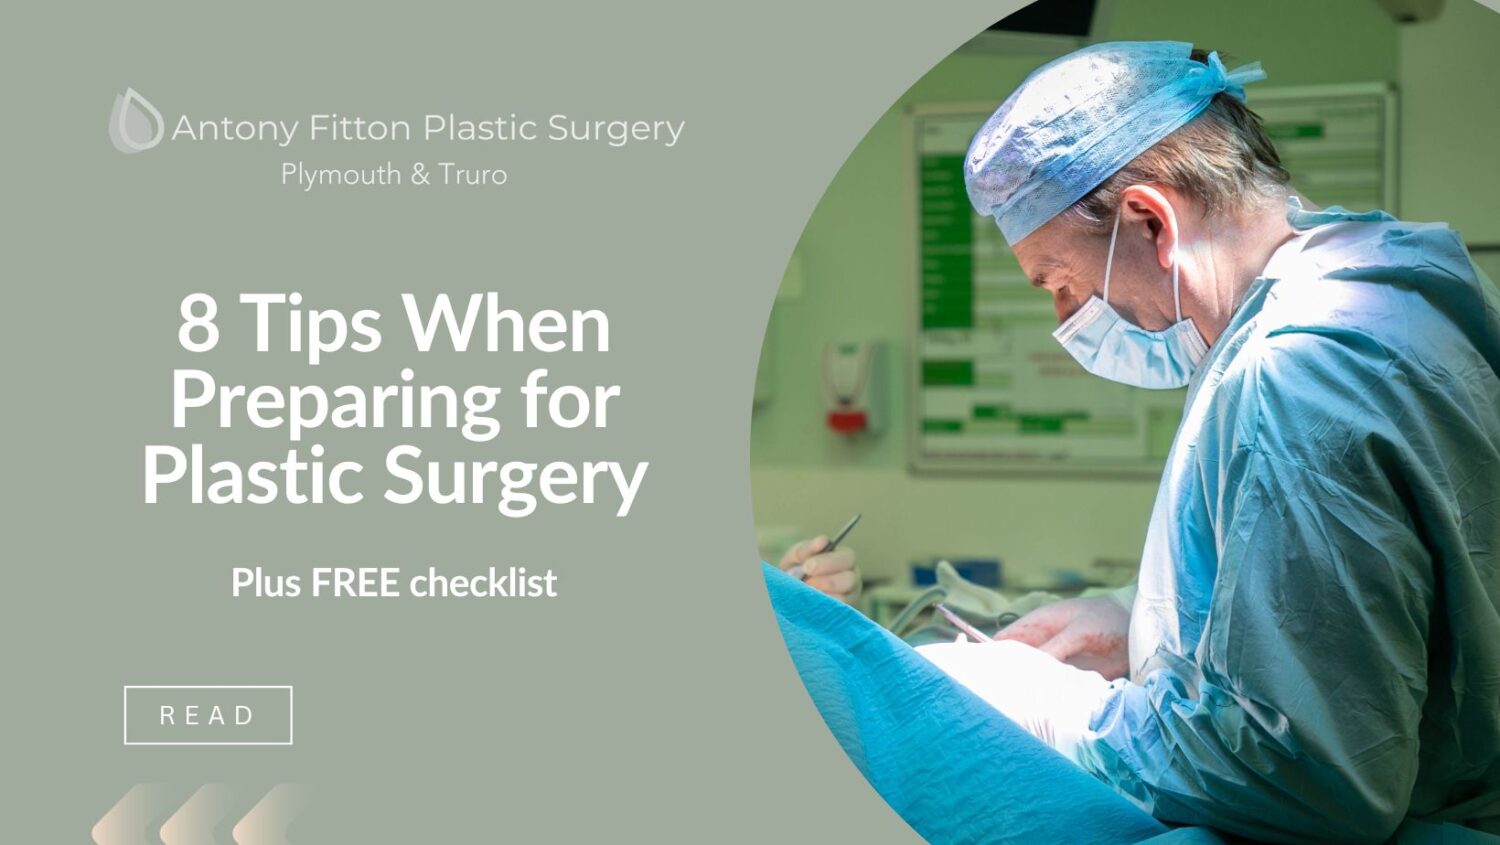 8 tips when preparing for plastic surgery | Antony Fitton Plastic Surgery | Plymouth and Truro